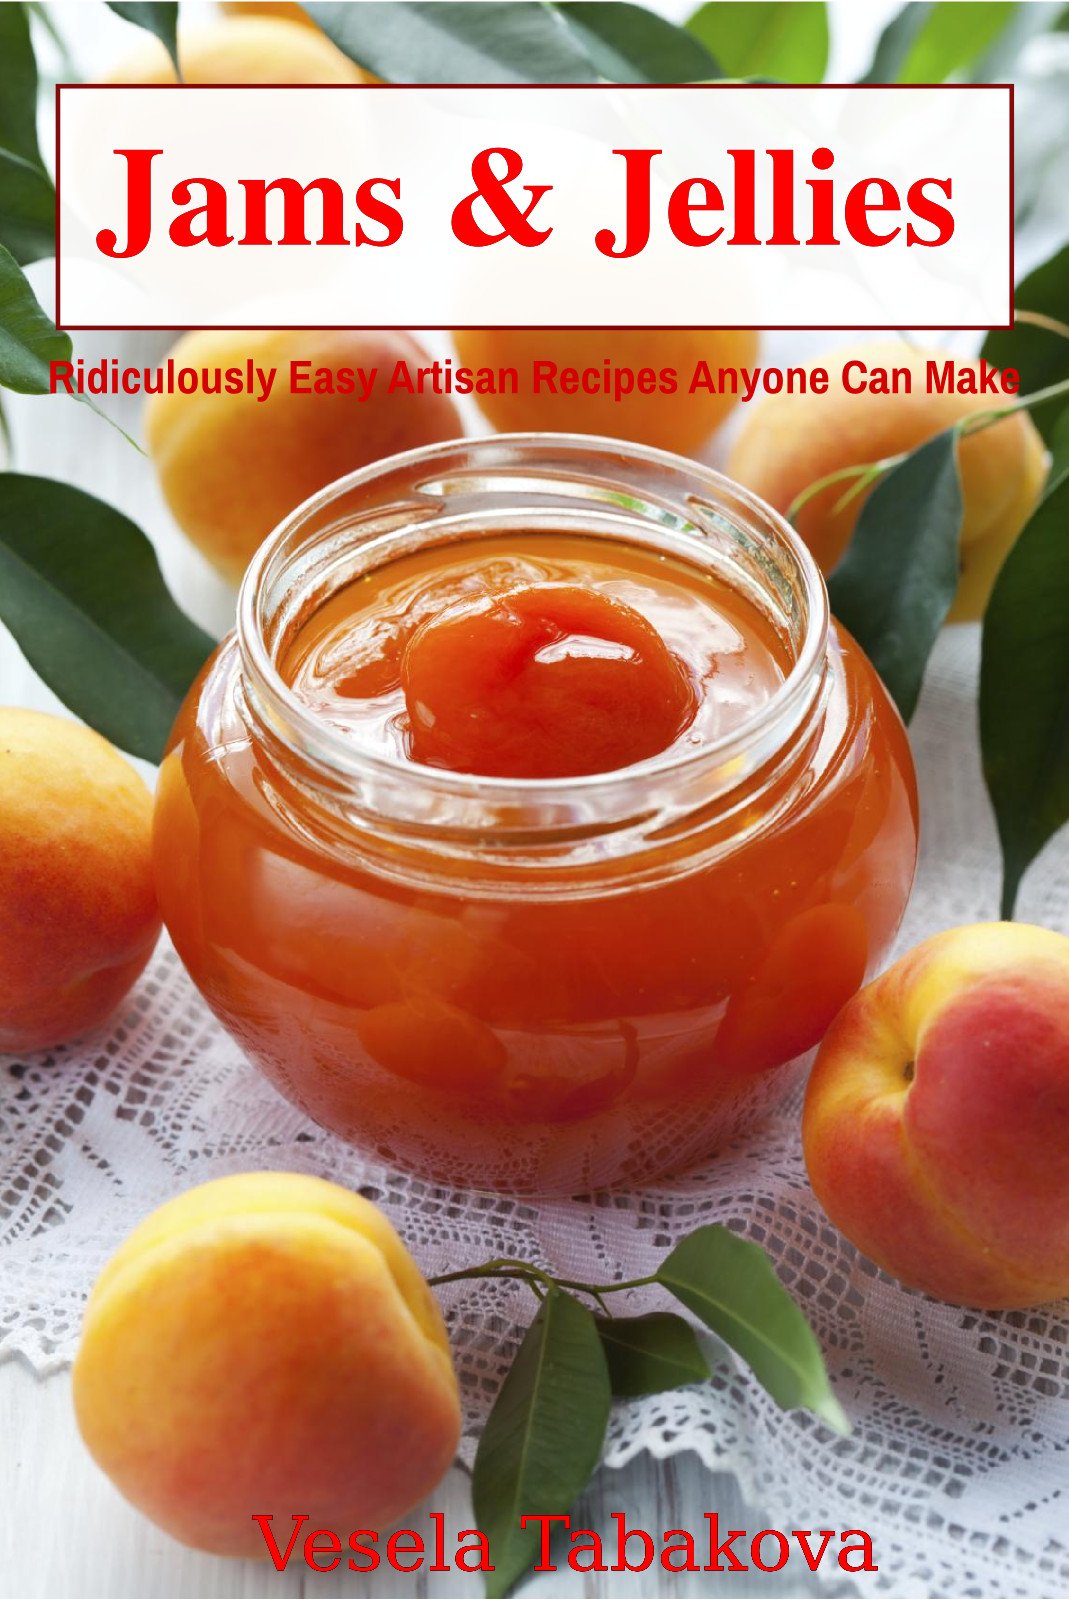 Jams & Jellies: Ridiculously Easy Artisan Recipes Anyone Can Make (Healthy Canning and Preserving)